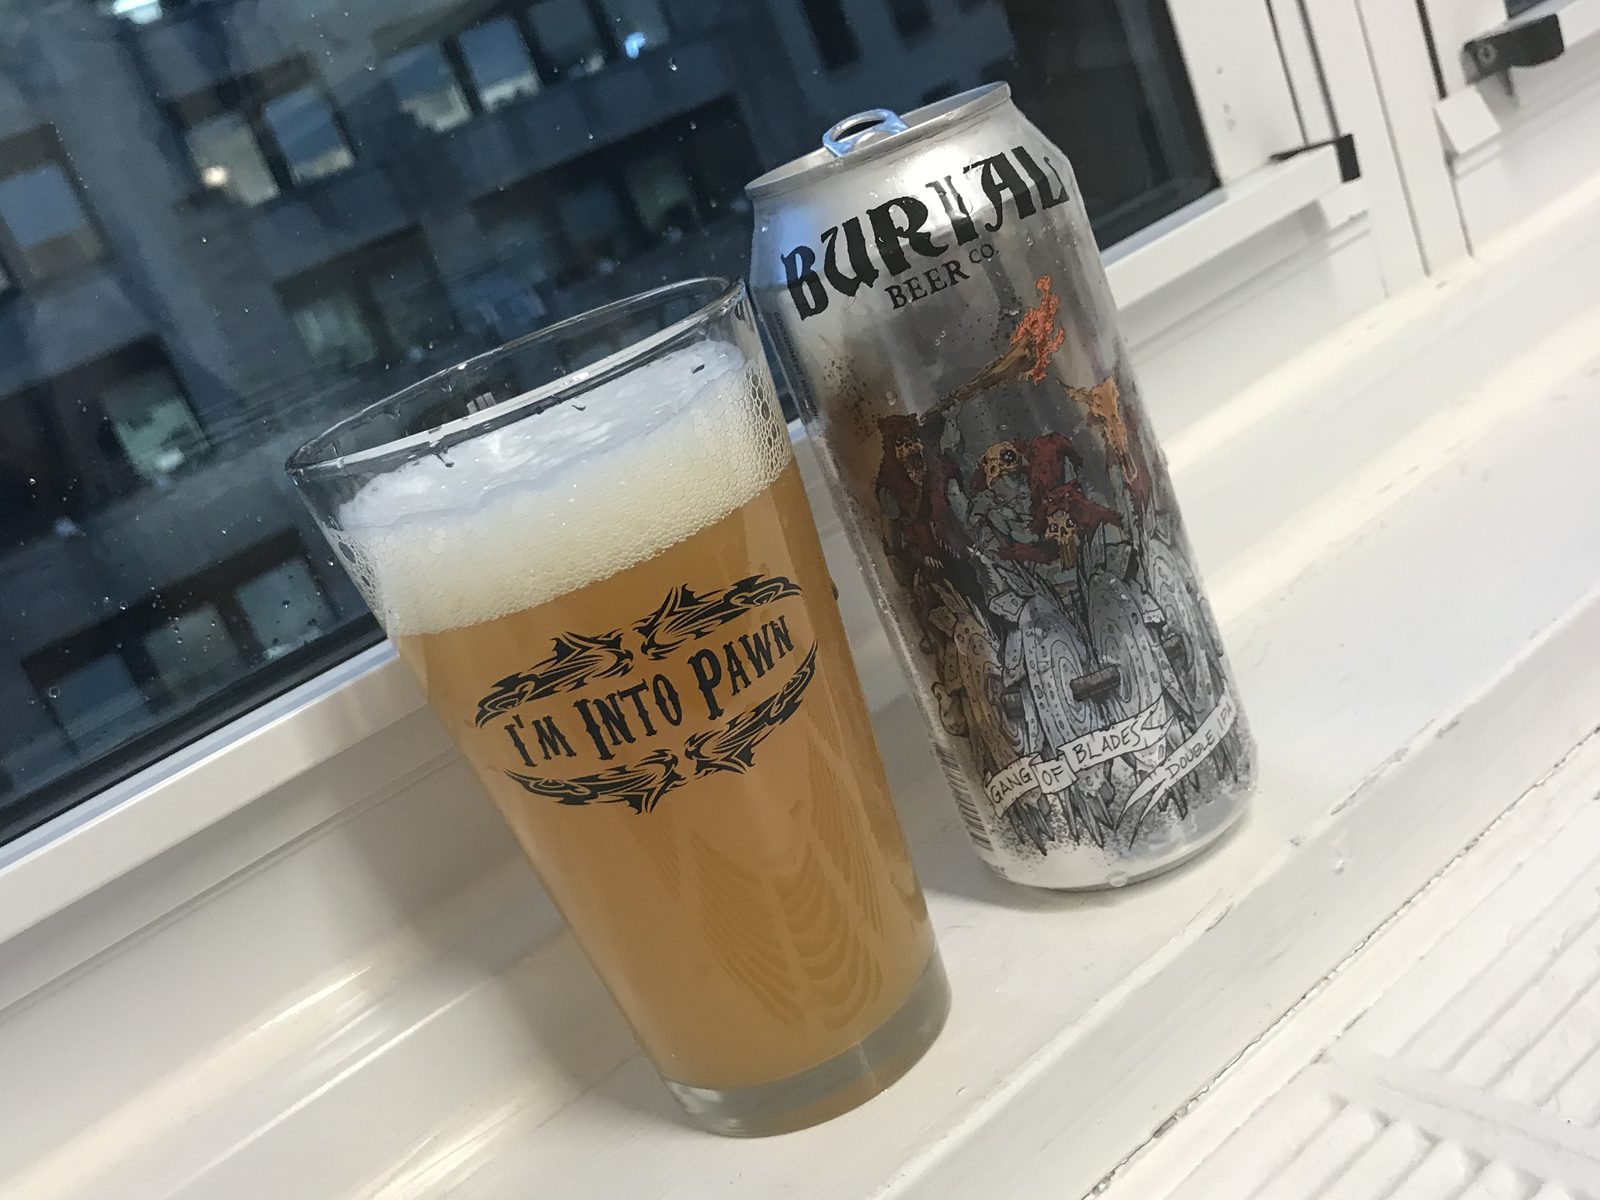 Burial Beer Company: Gang of Blades